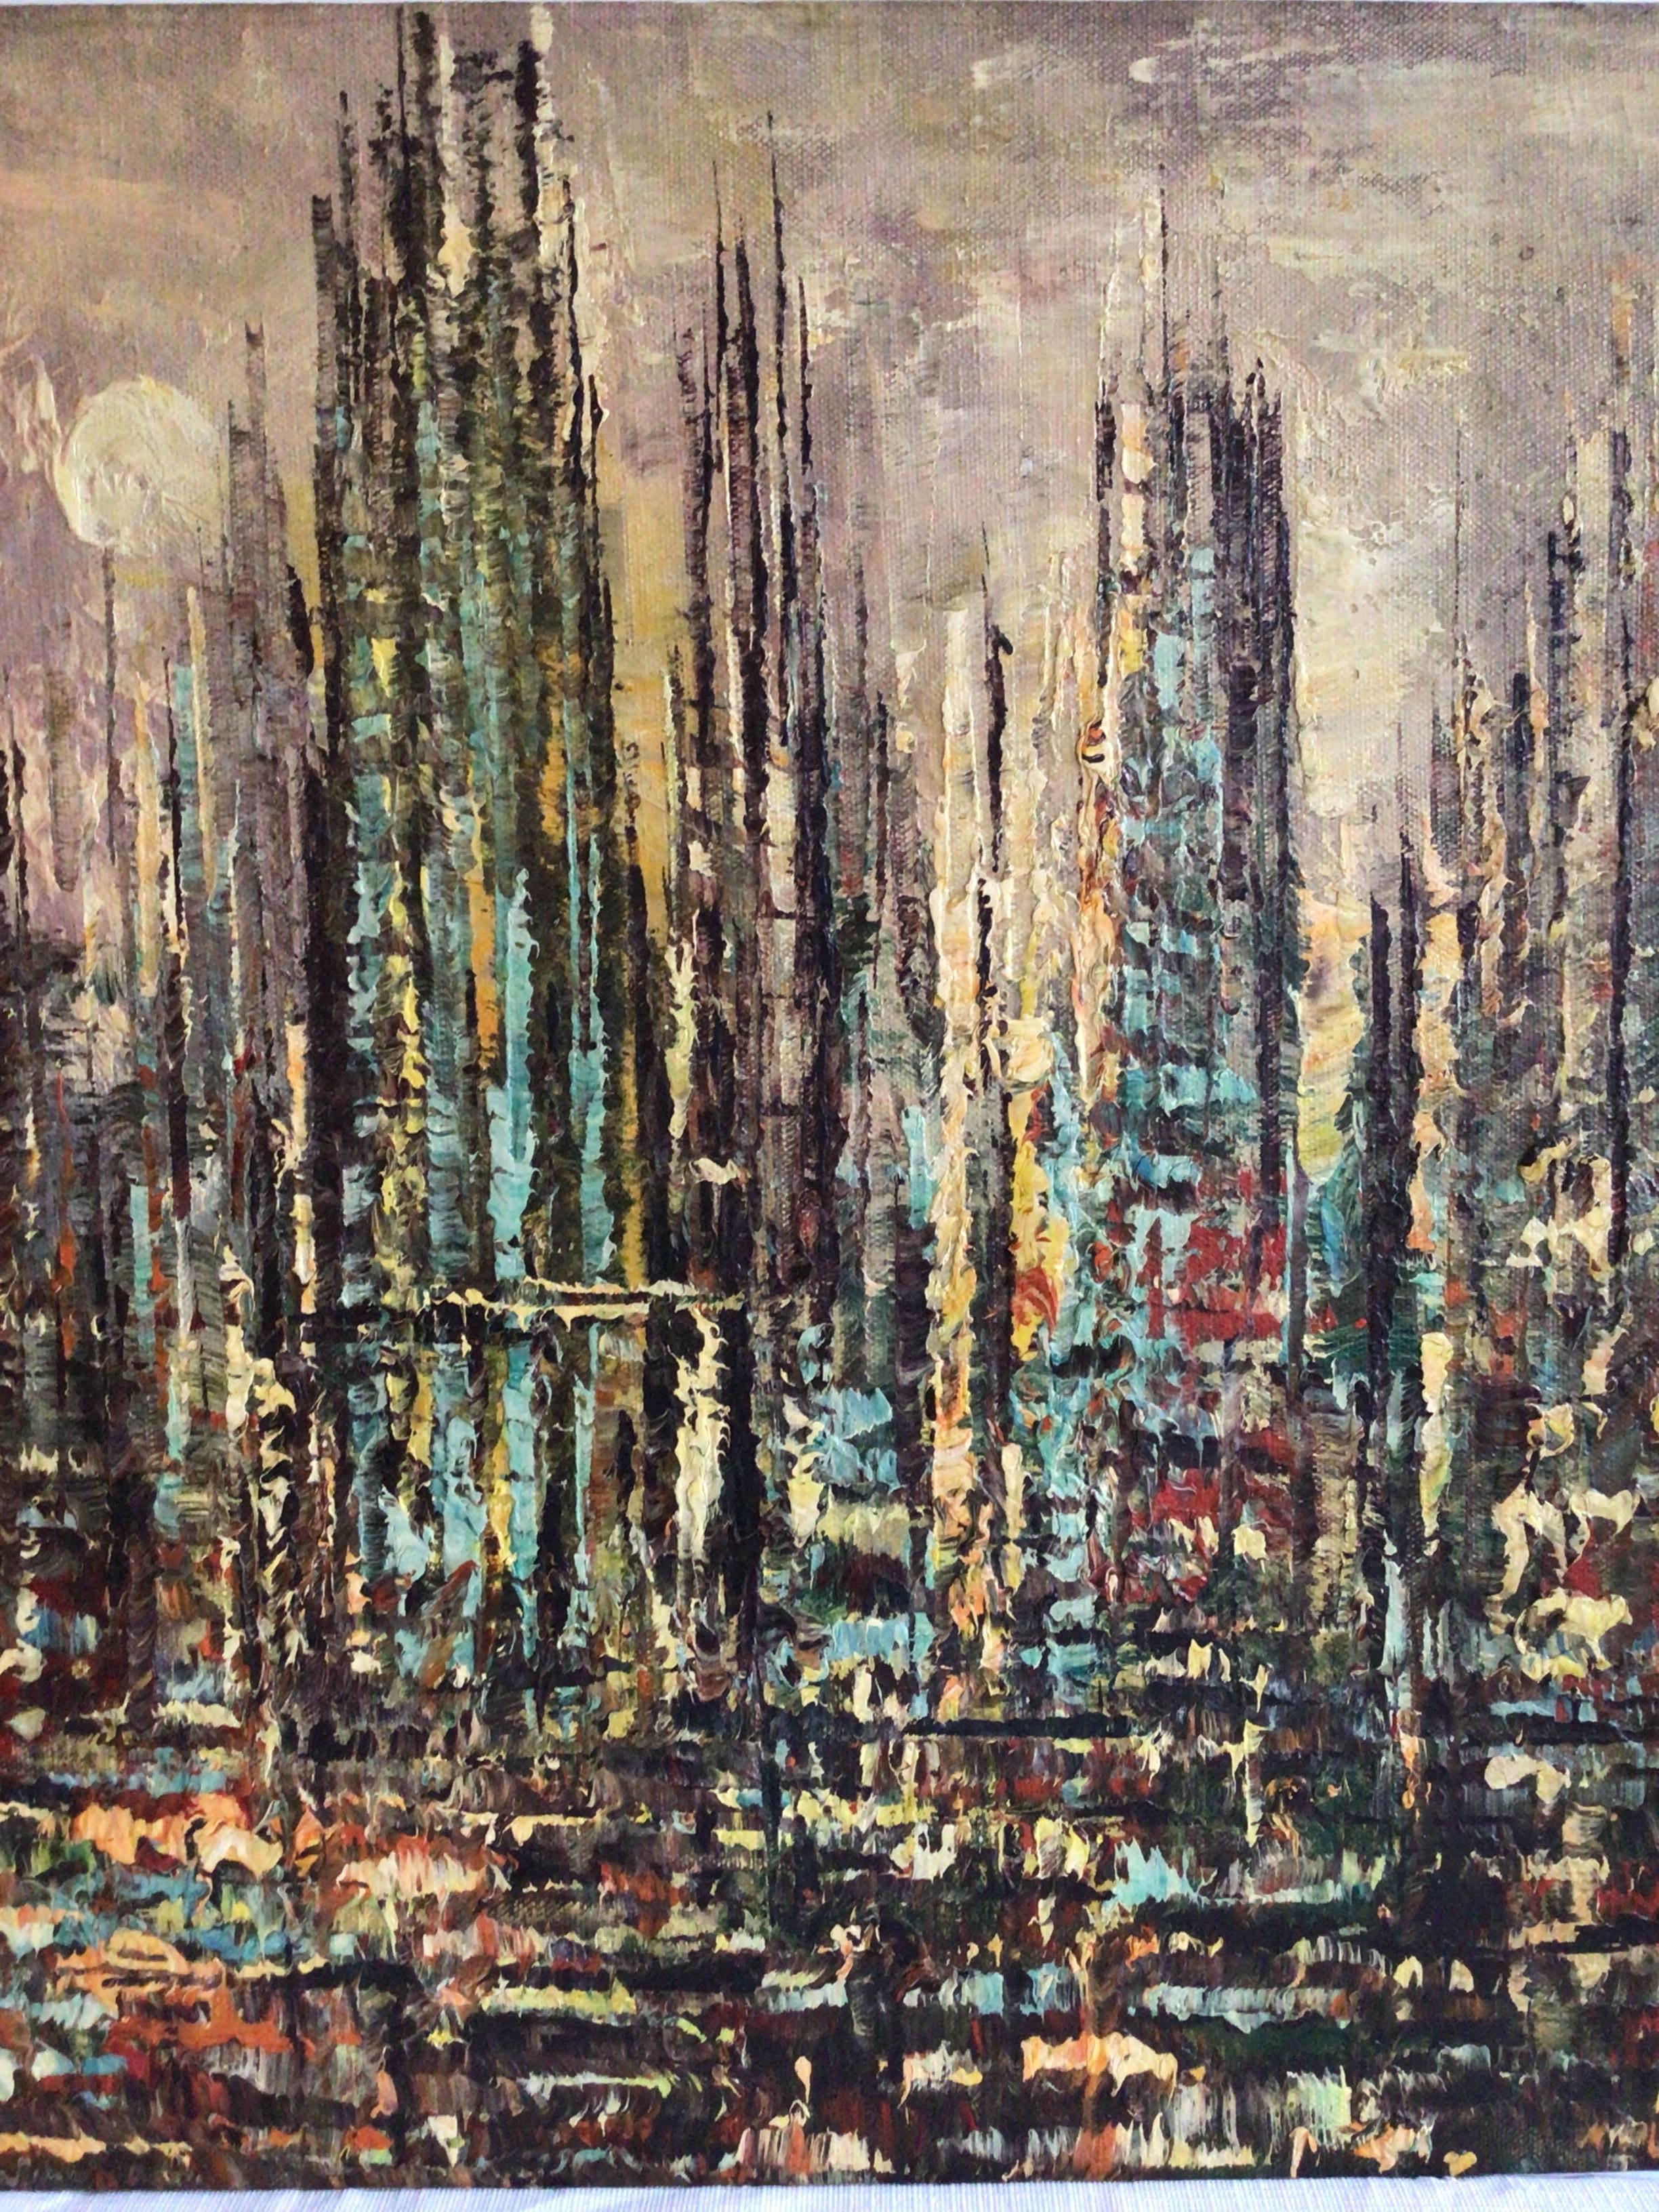 1950s Oil Painting on Canvas Of Abstract Cityscape In Good Condition For Sale In Tarrytown, NY